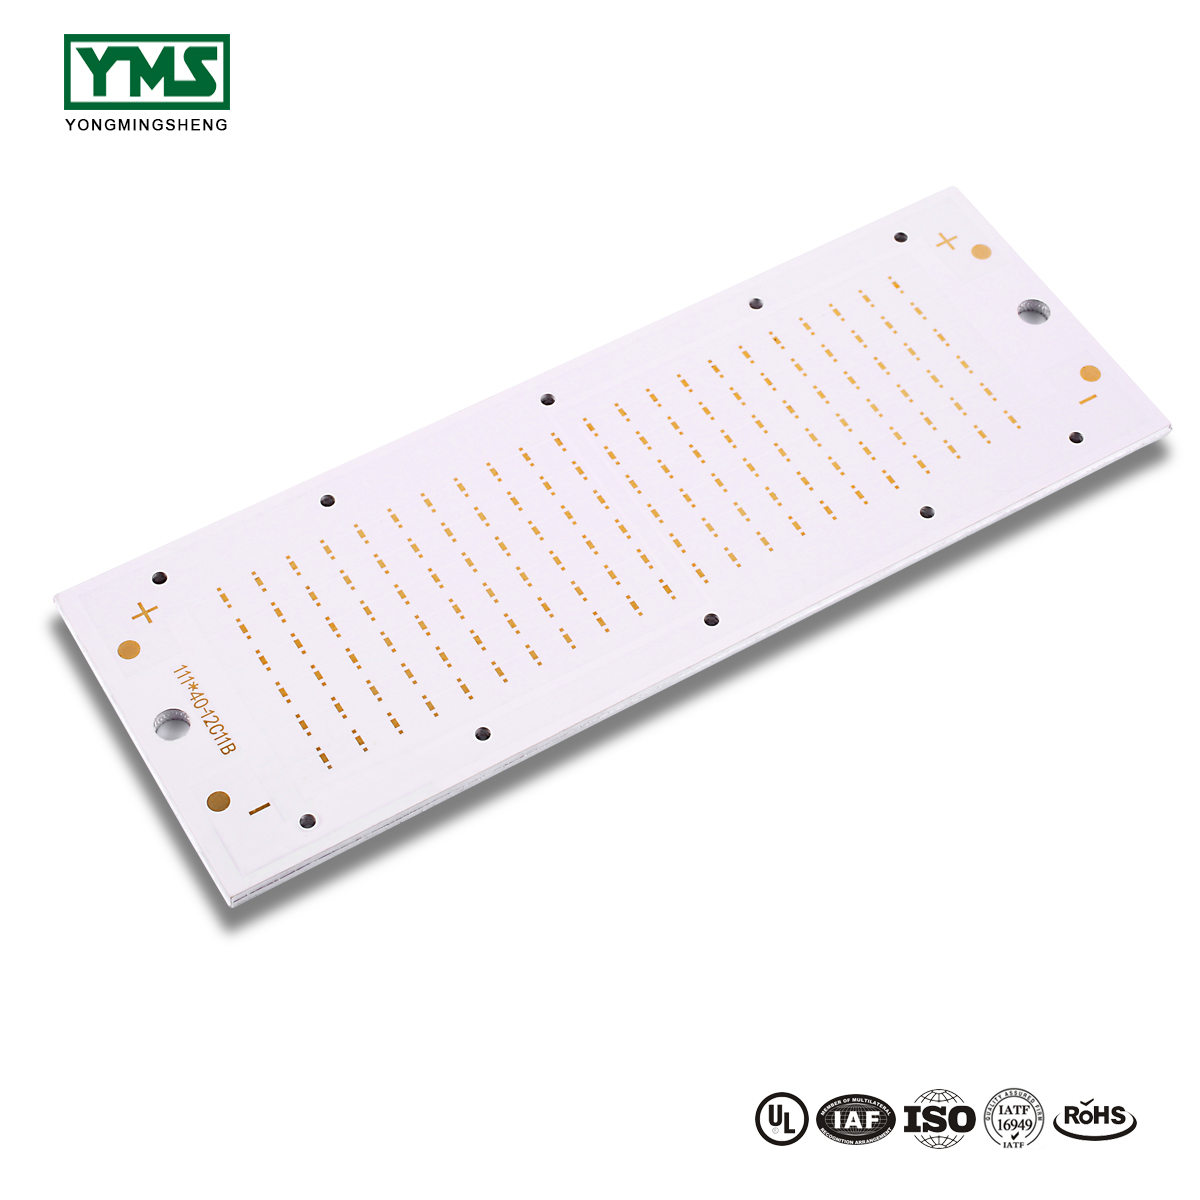 2017 High quality Specialize Pcb - 1Layer Aluminum base Board | YMSPCB – Yongmingsheng